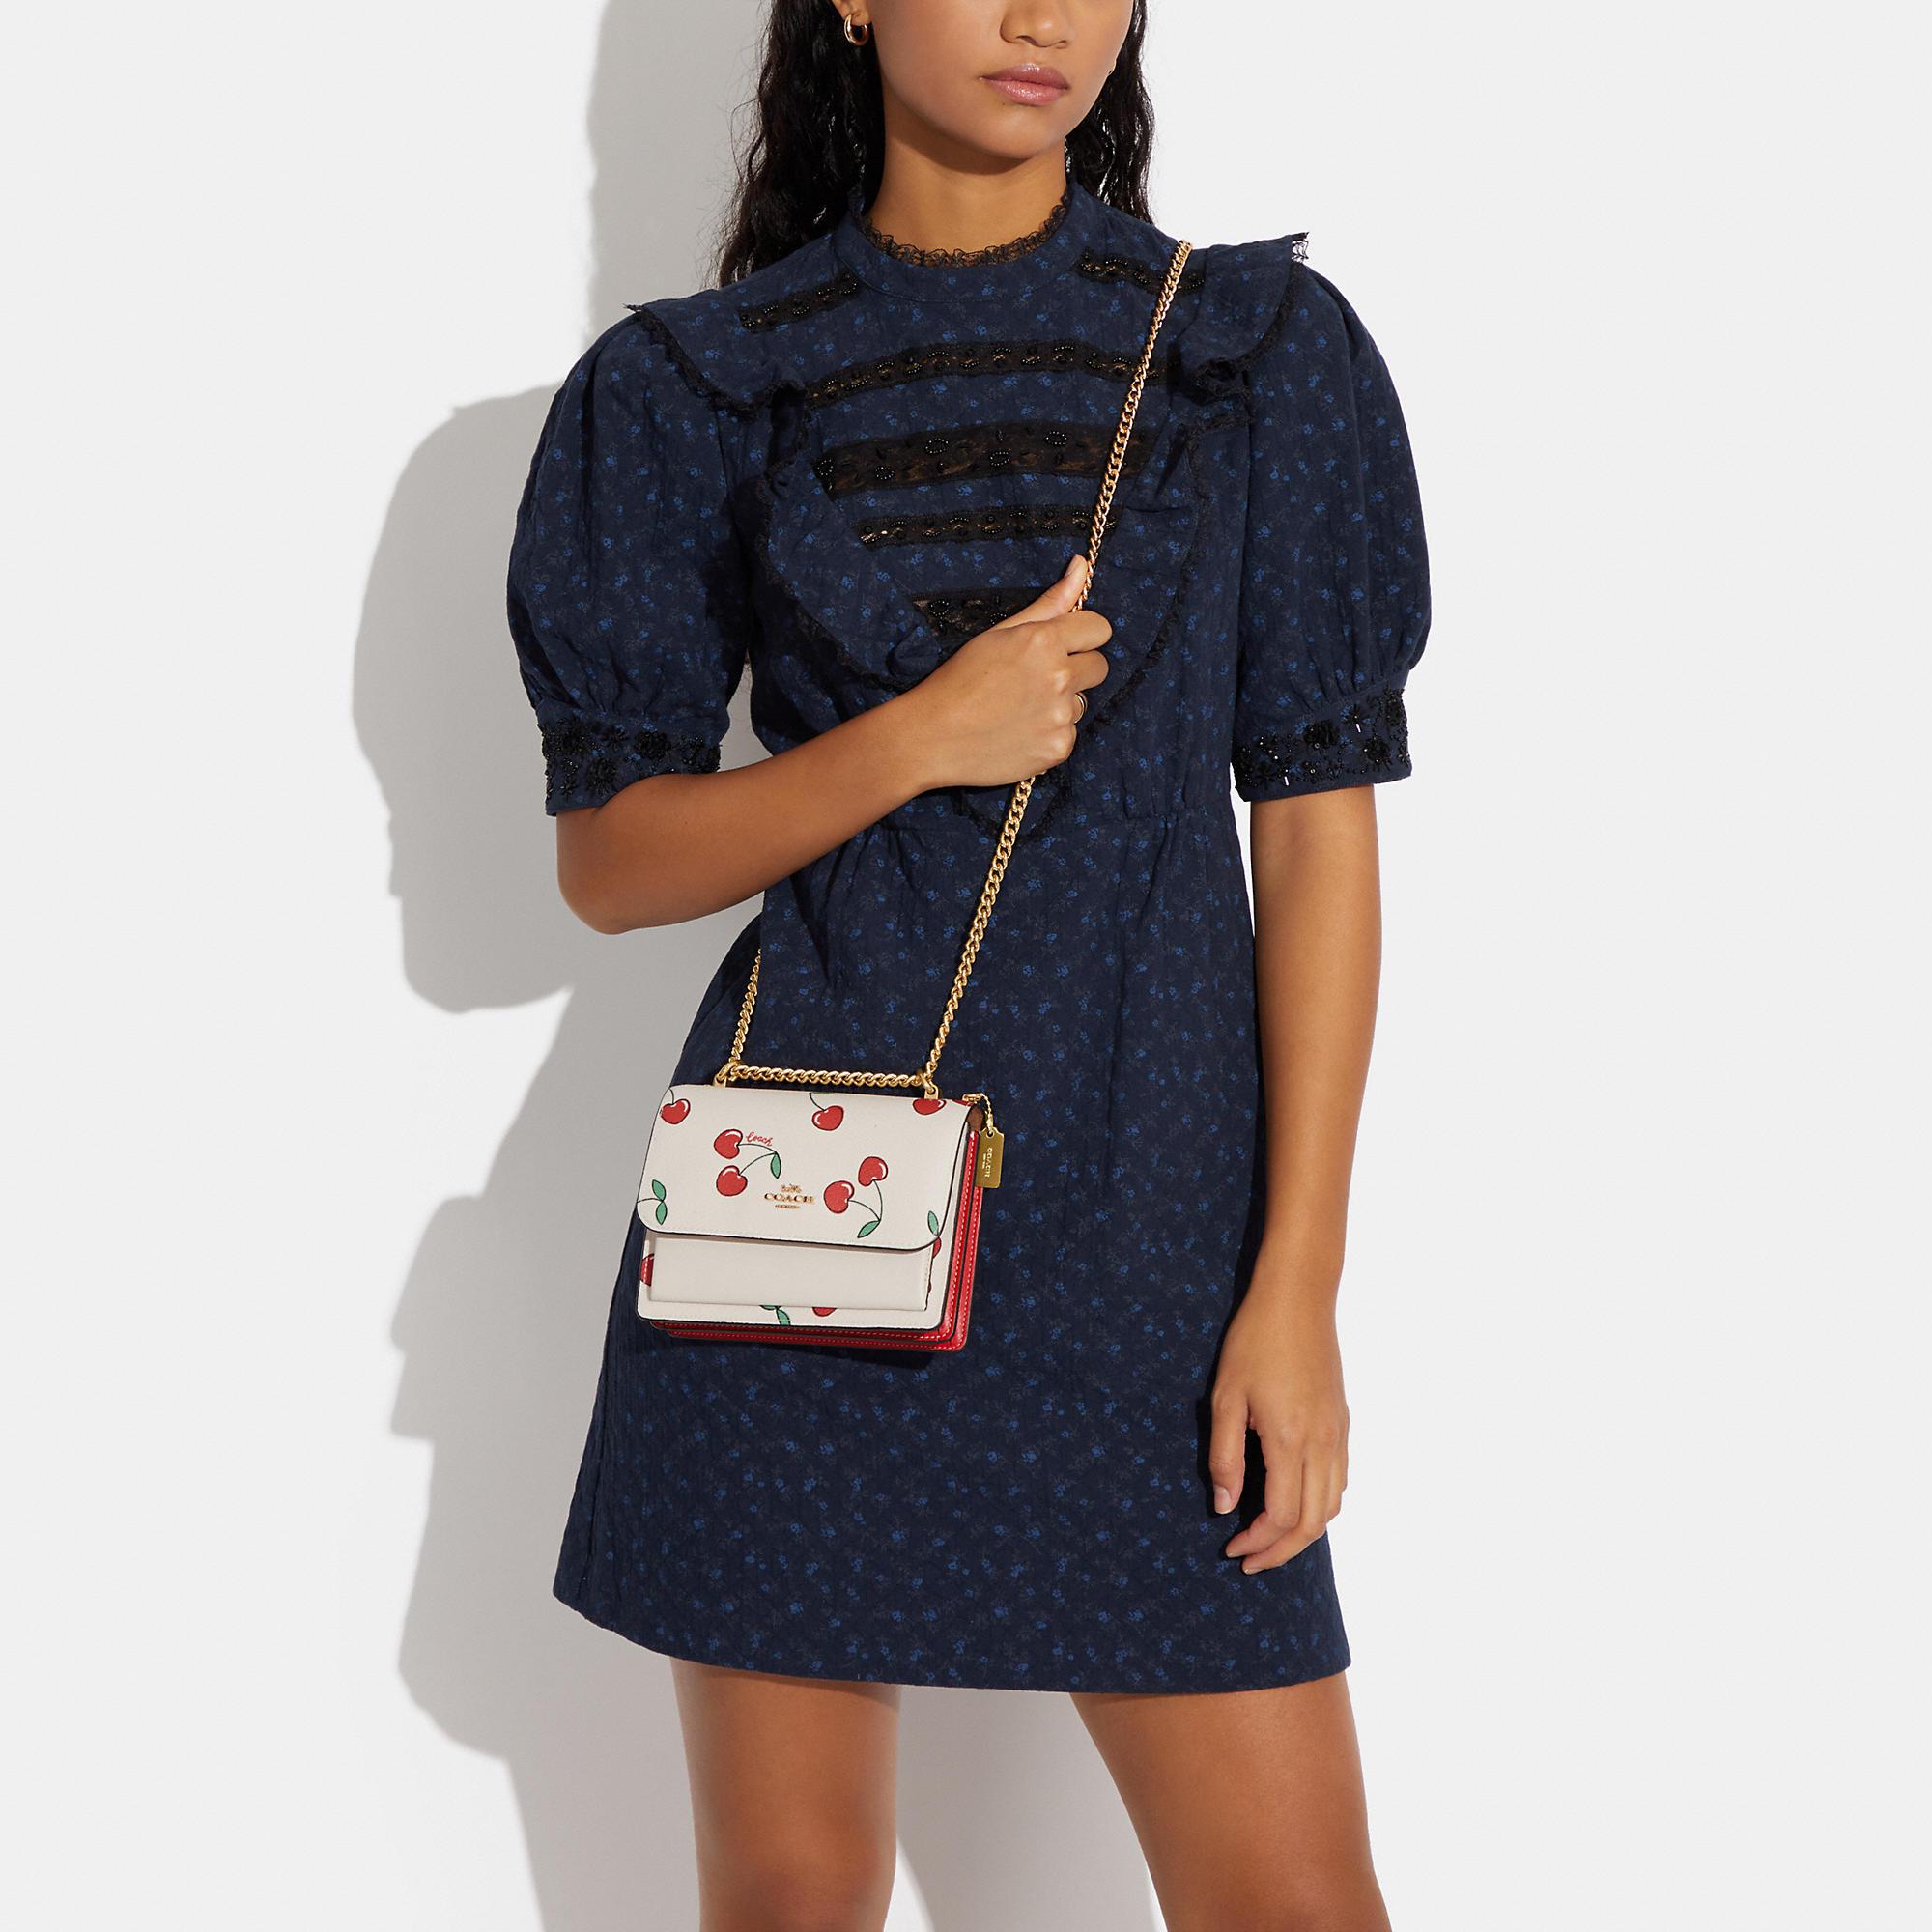 Coach Outlet's Clearance Heart Cherry Handbags Are Perfect for Spring